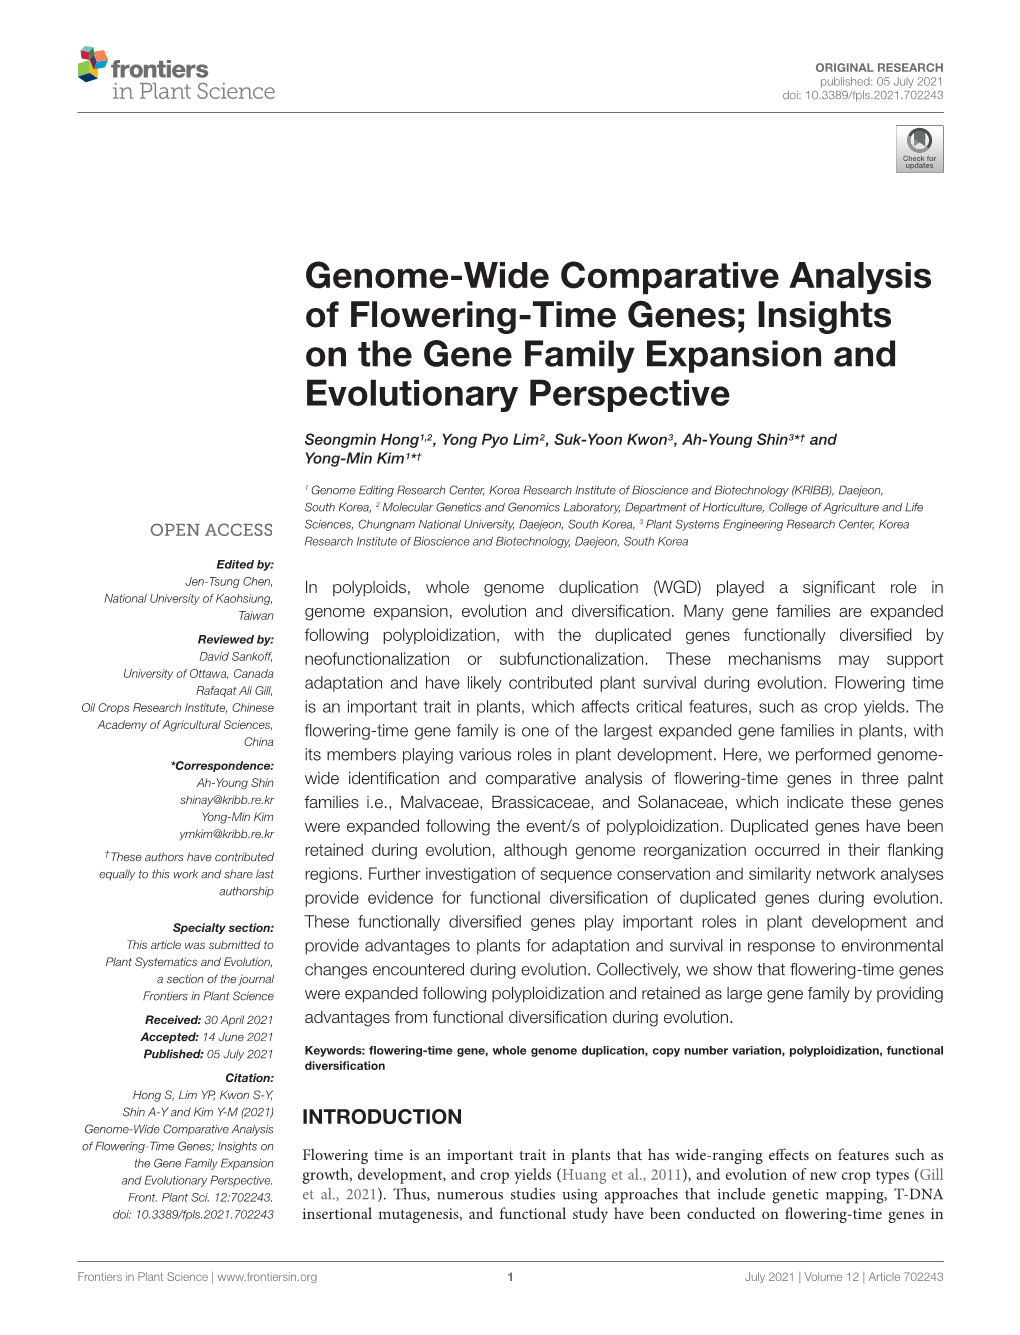 Genome-Wide Comparative Analysis of Flowering-Time Genes; Insights on the Gene Family Expansion and Evolutionary Perspective